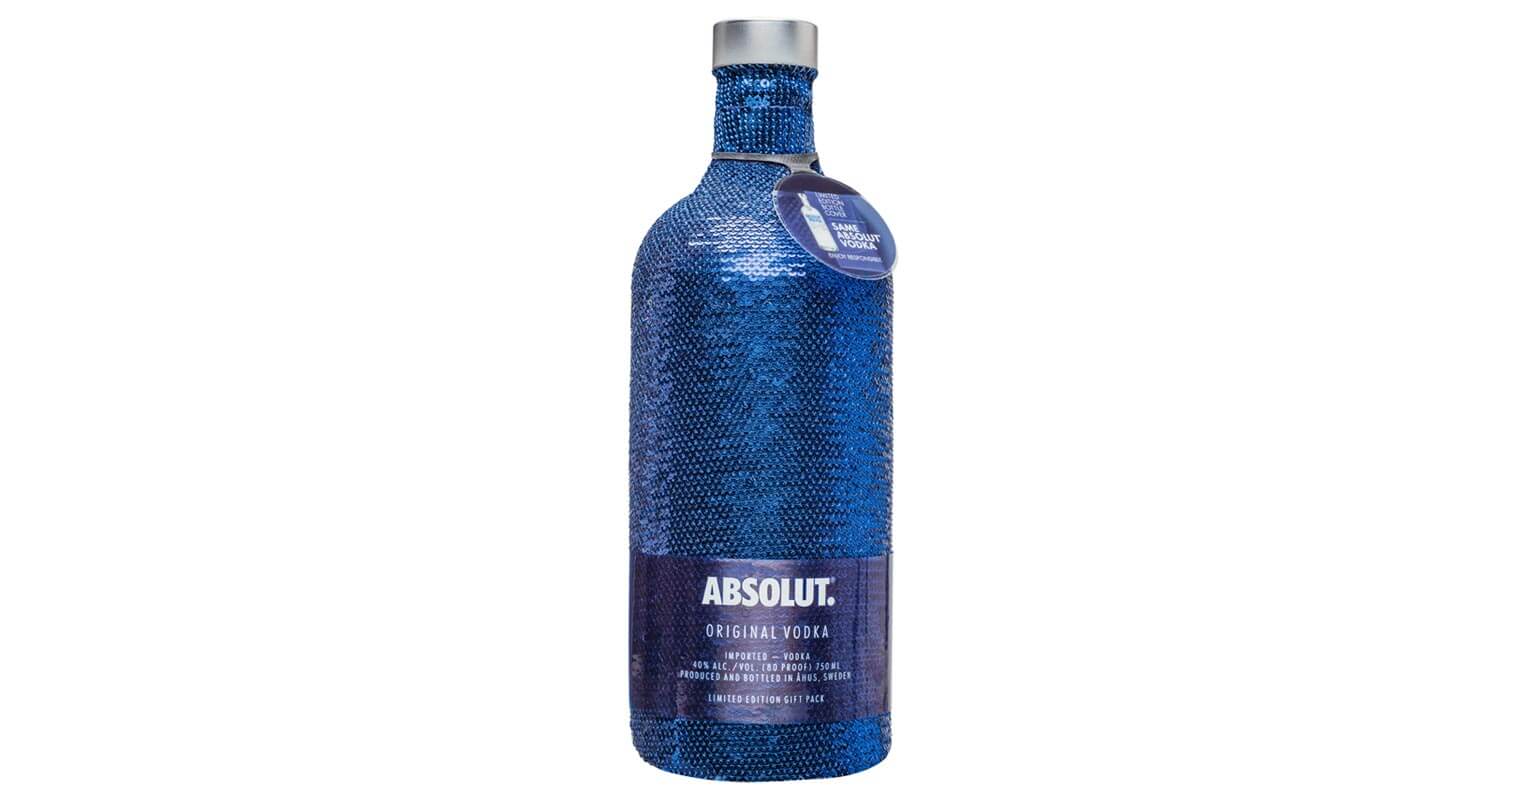 Absolut Launches Limited Edition Sequin Bottle, featured image